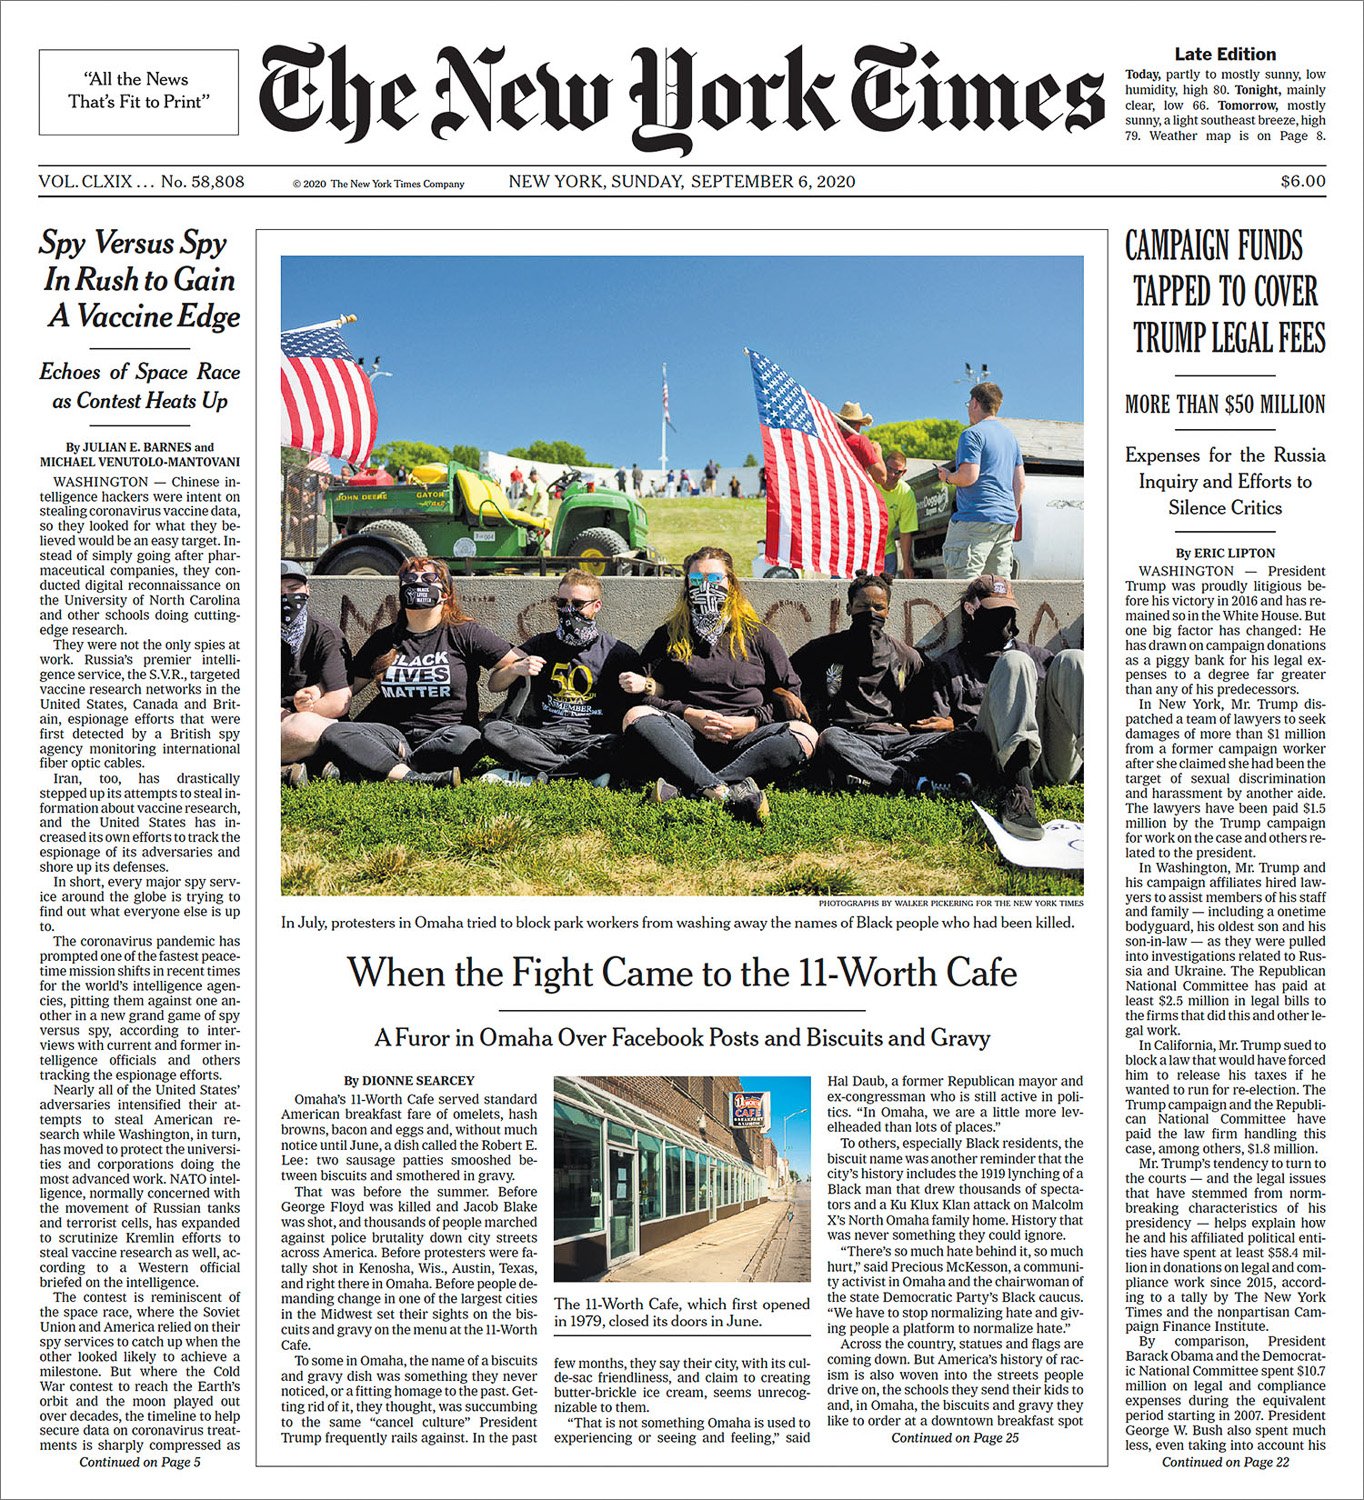  Cover of the September 6, 2020 Sunday edition of the New York Times 